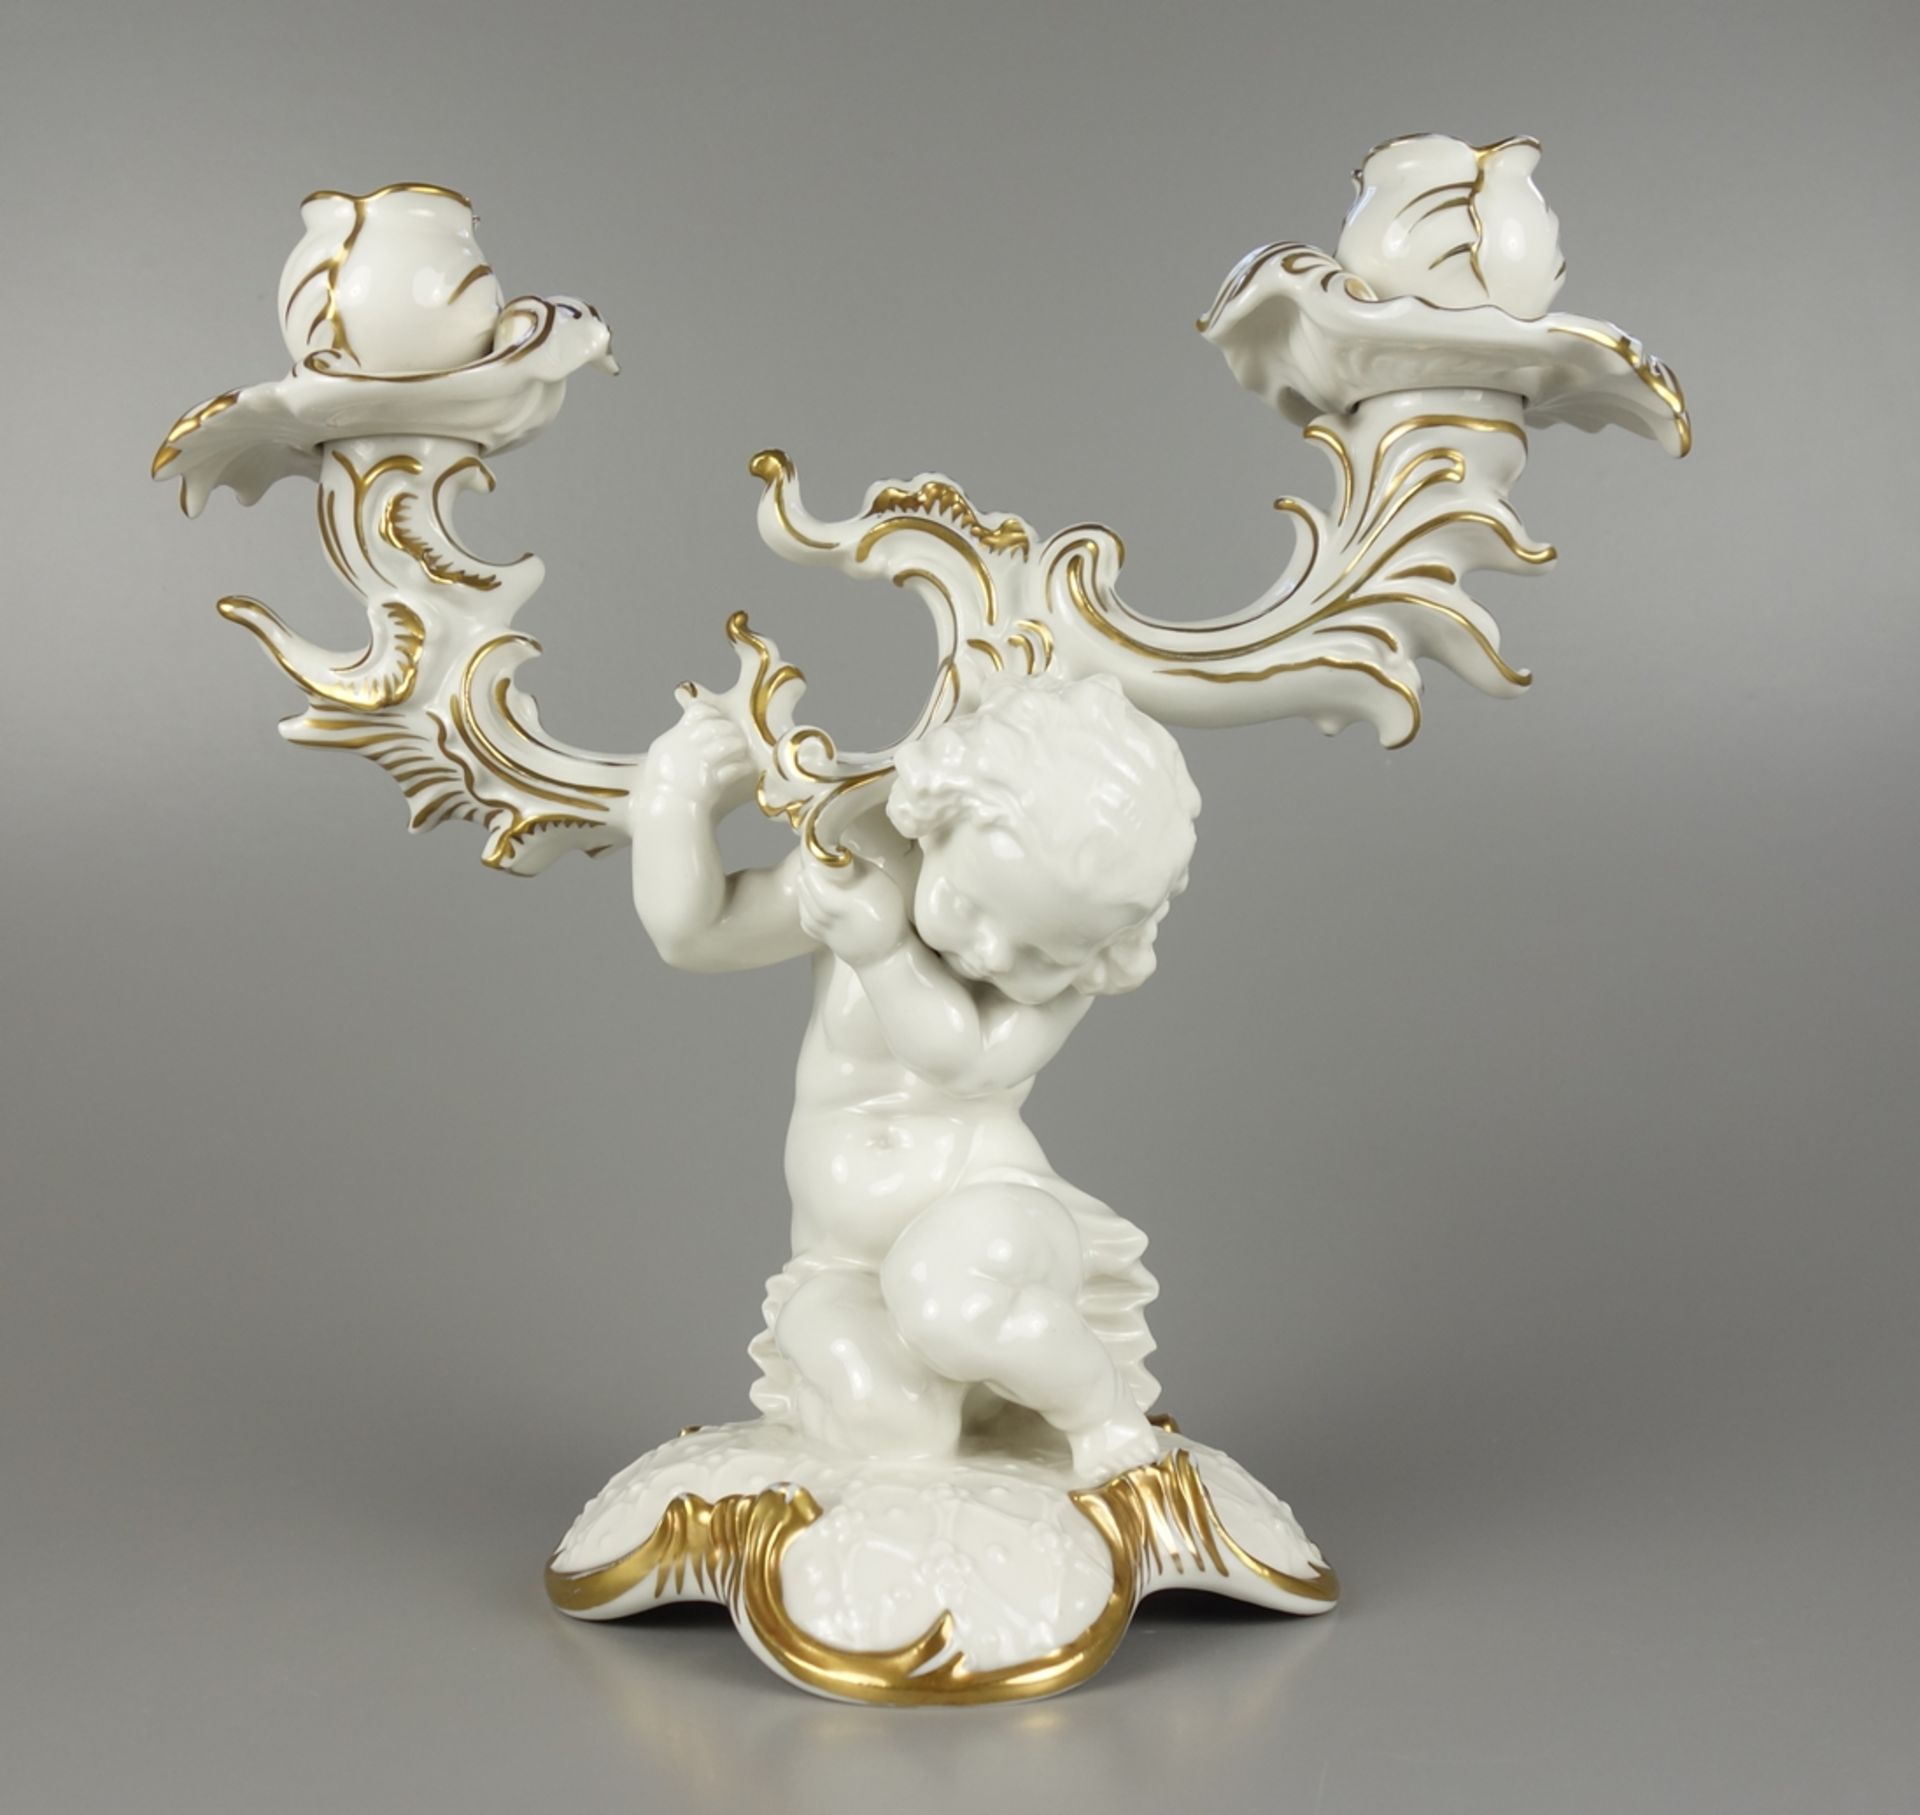 Pair of large figural candlesticks, Karl Tutter for Hutschenreuther, 1930s - Image 3 of 7